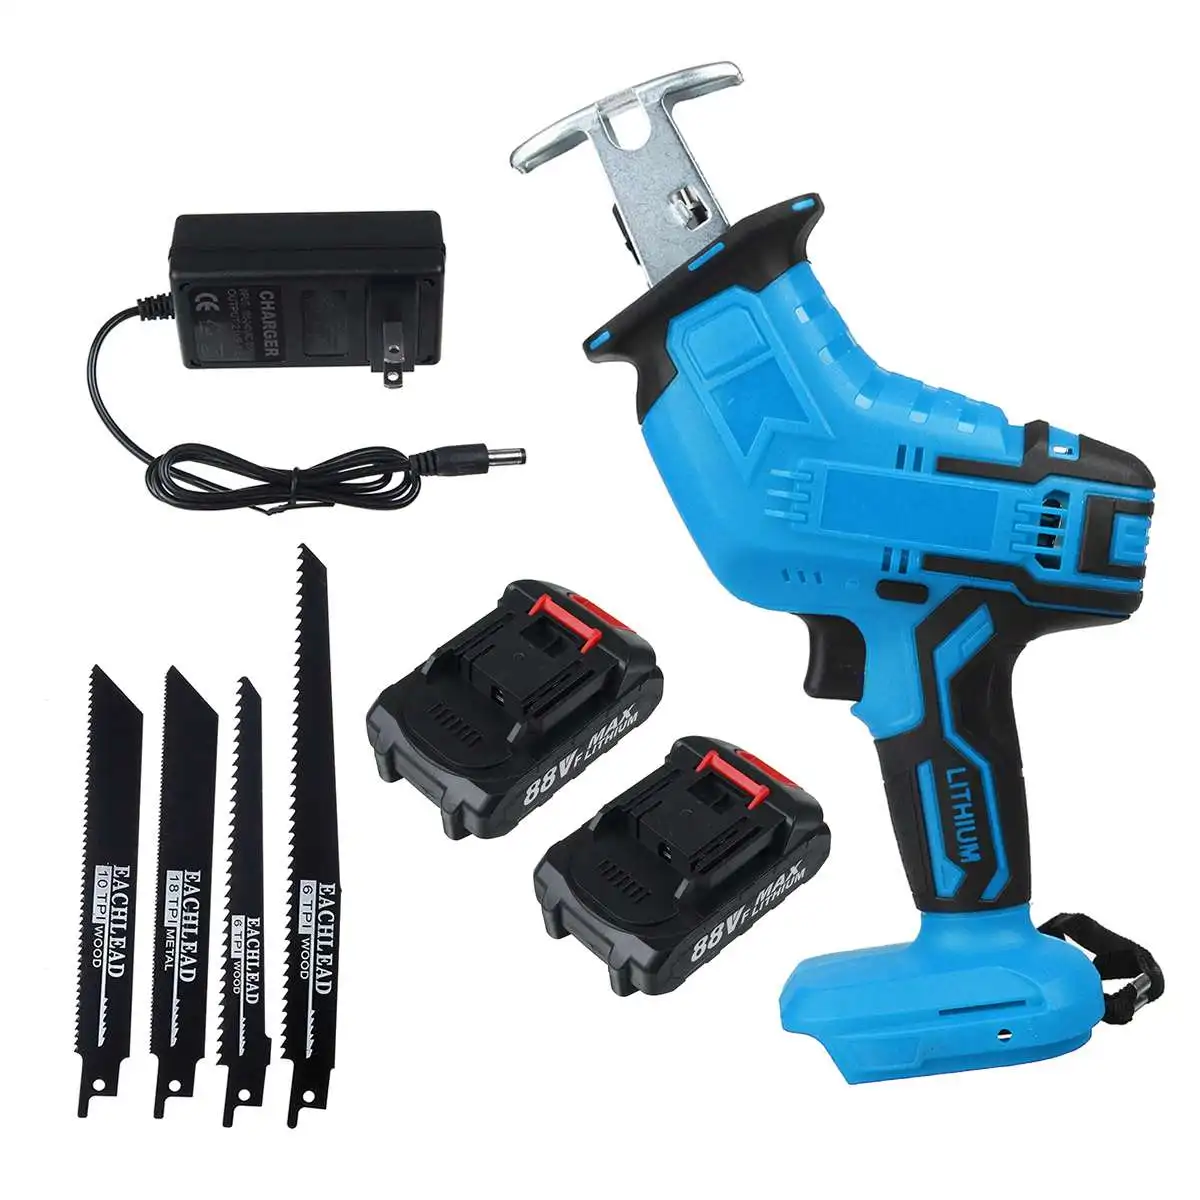 

88V Cordless Reciprocating Saw + 4 Saw Blades Metal Cutting Wood Tool Portable Woodworking Cutters with 1/2 Batterys Charge